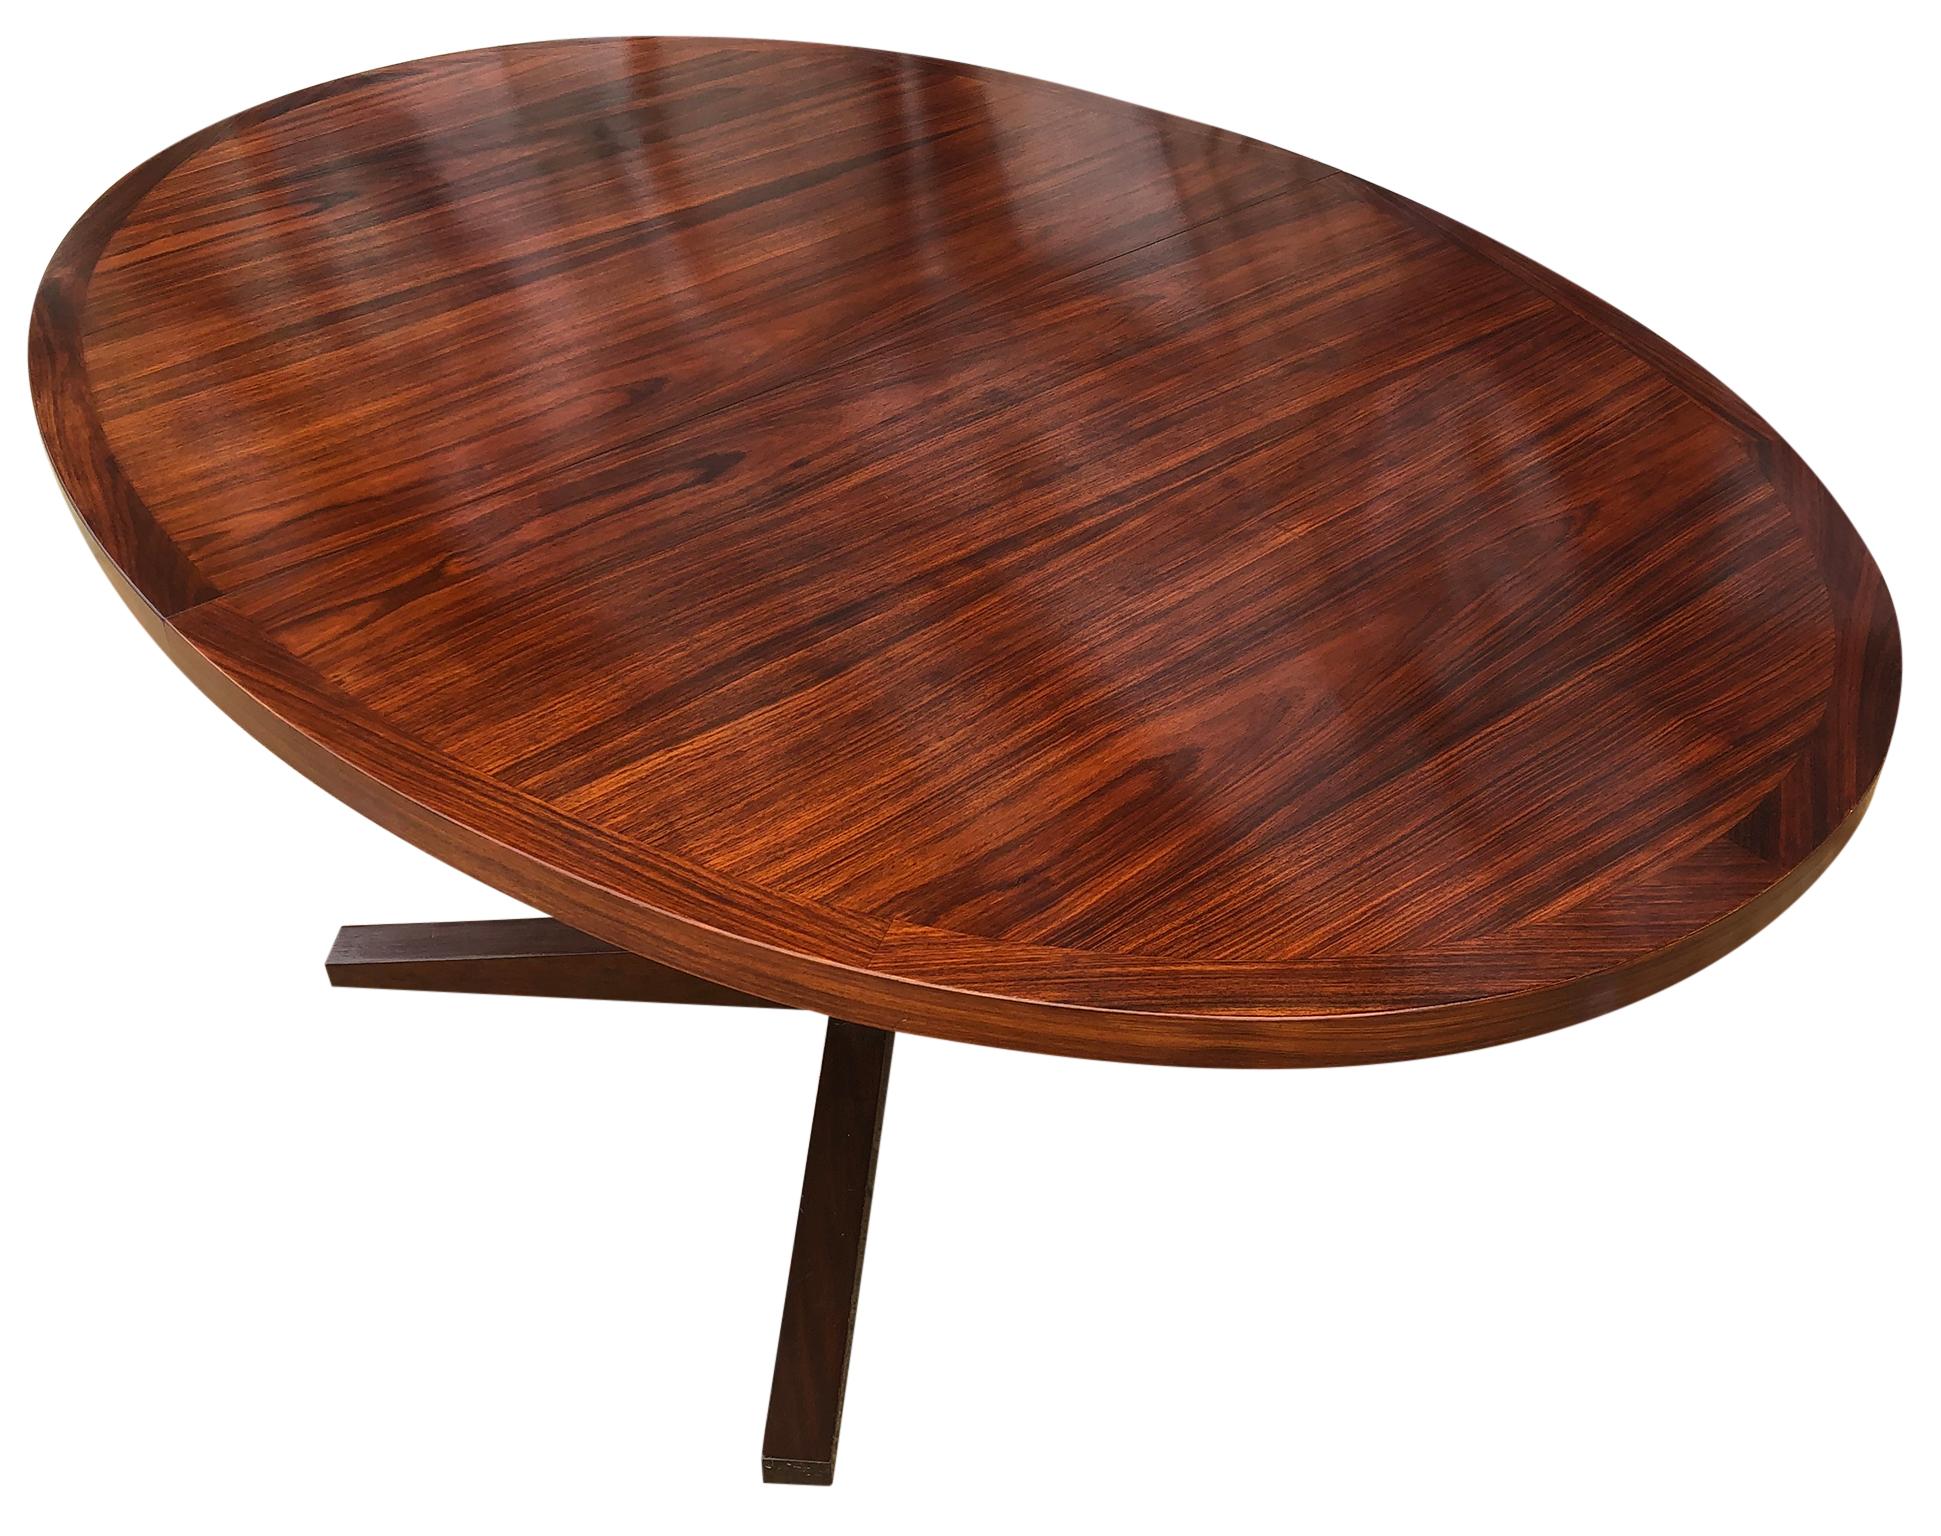 Midcentury Elliptical rosewood expandable round dining table with (2) 20